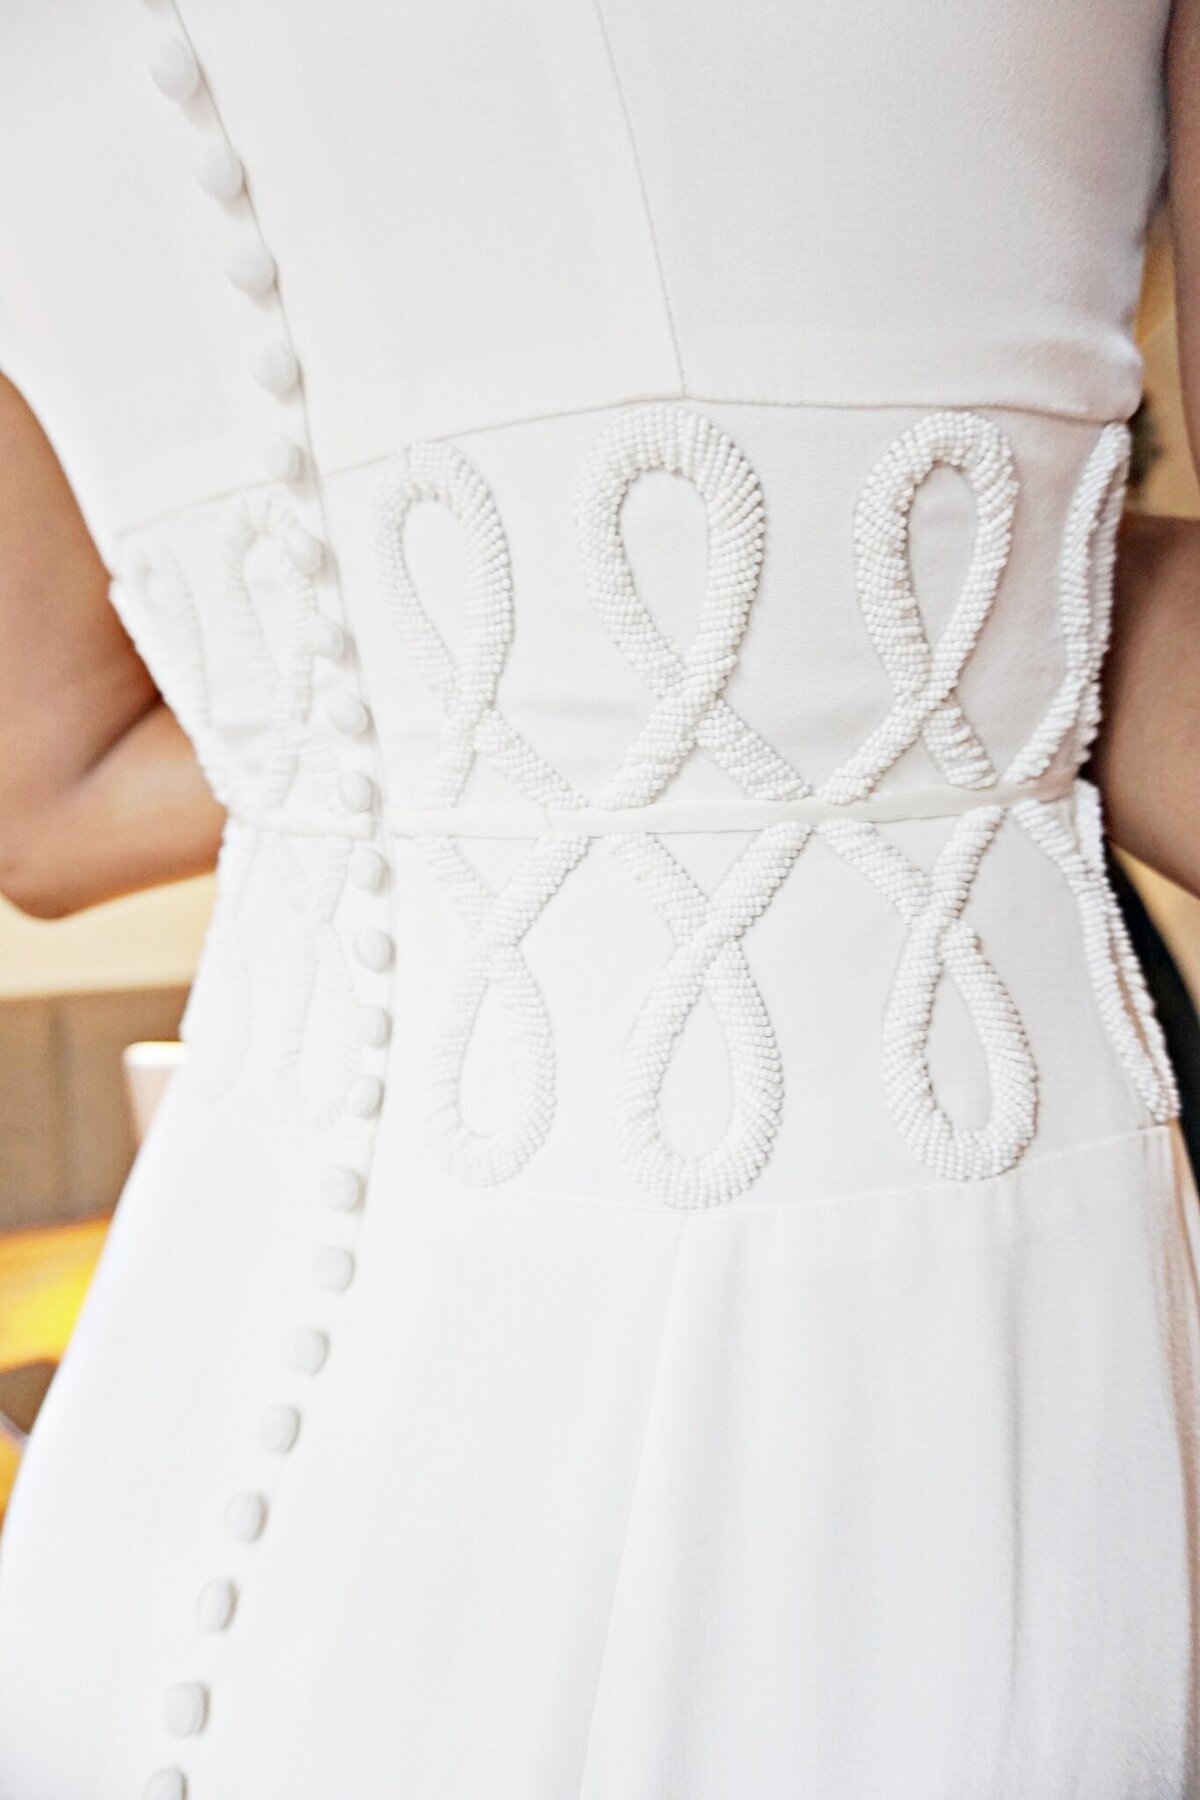 The waistline of the Anila style is hand-beaded with a subtle 3D geometric motif that wraps around the waist.